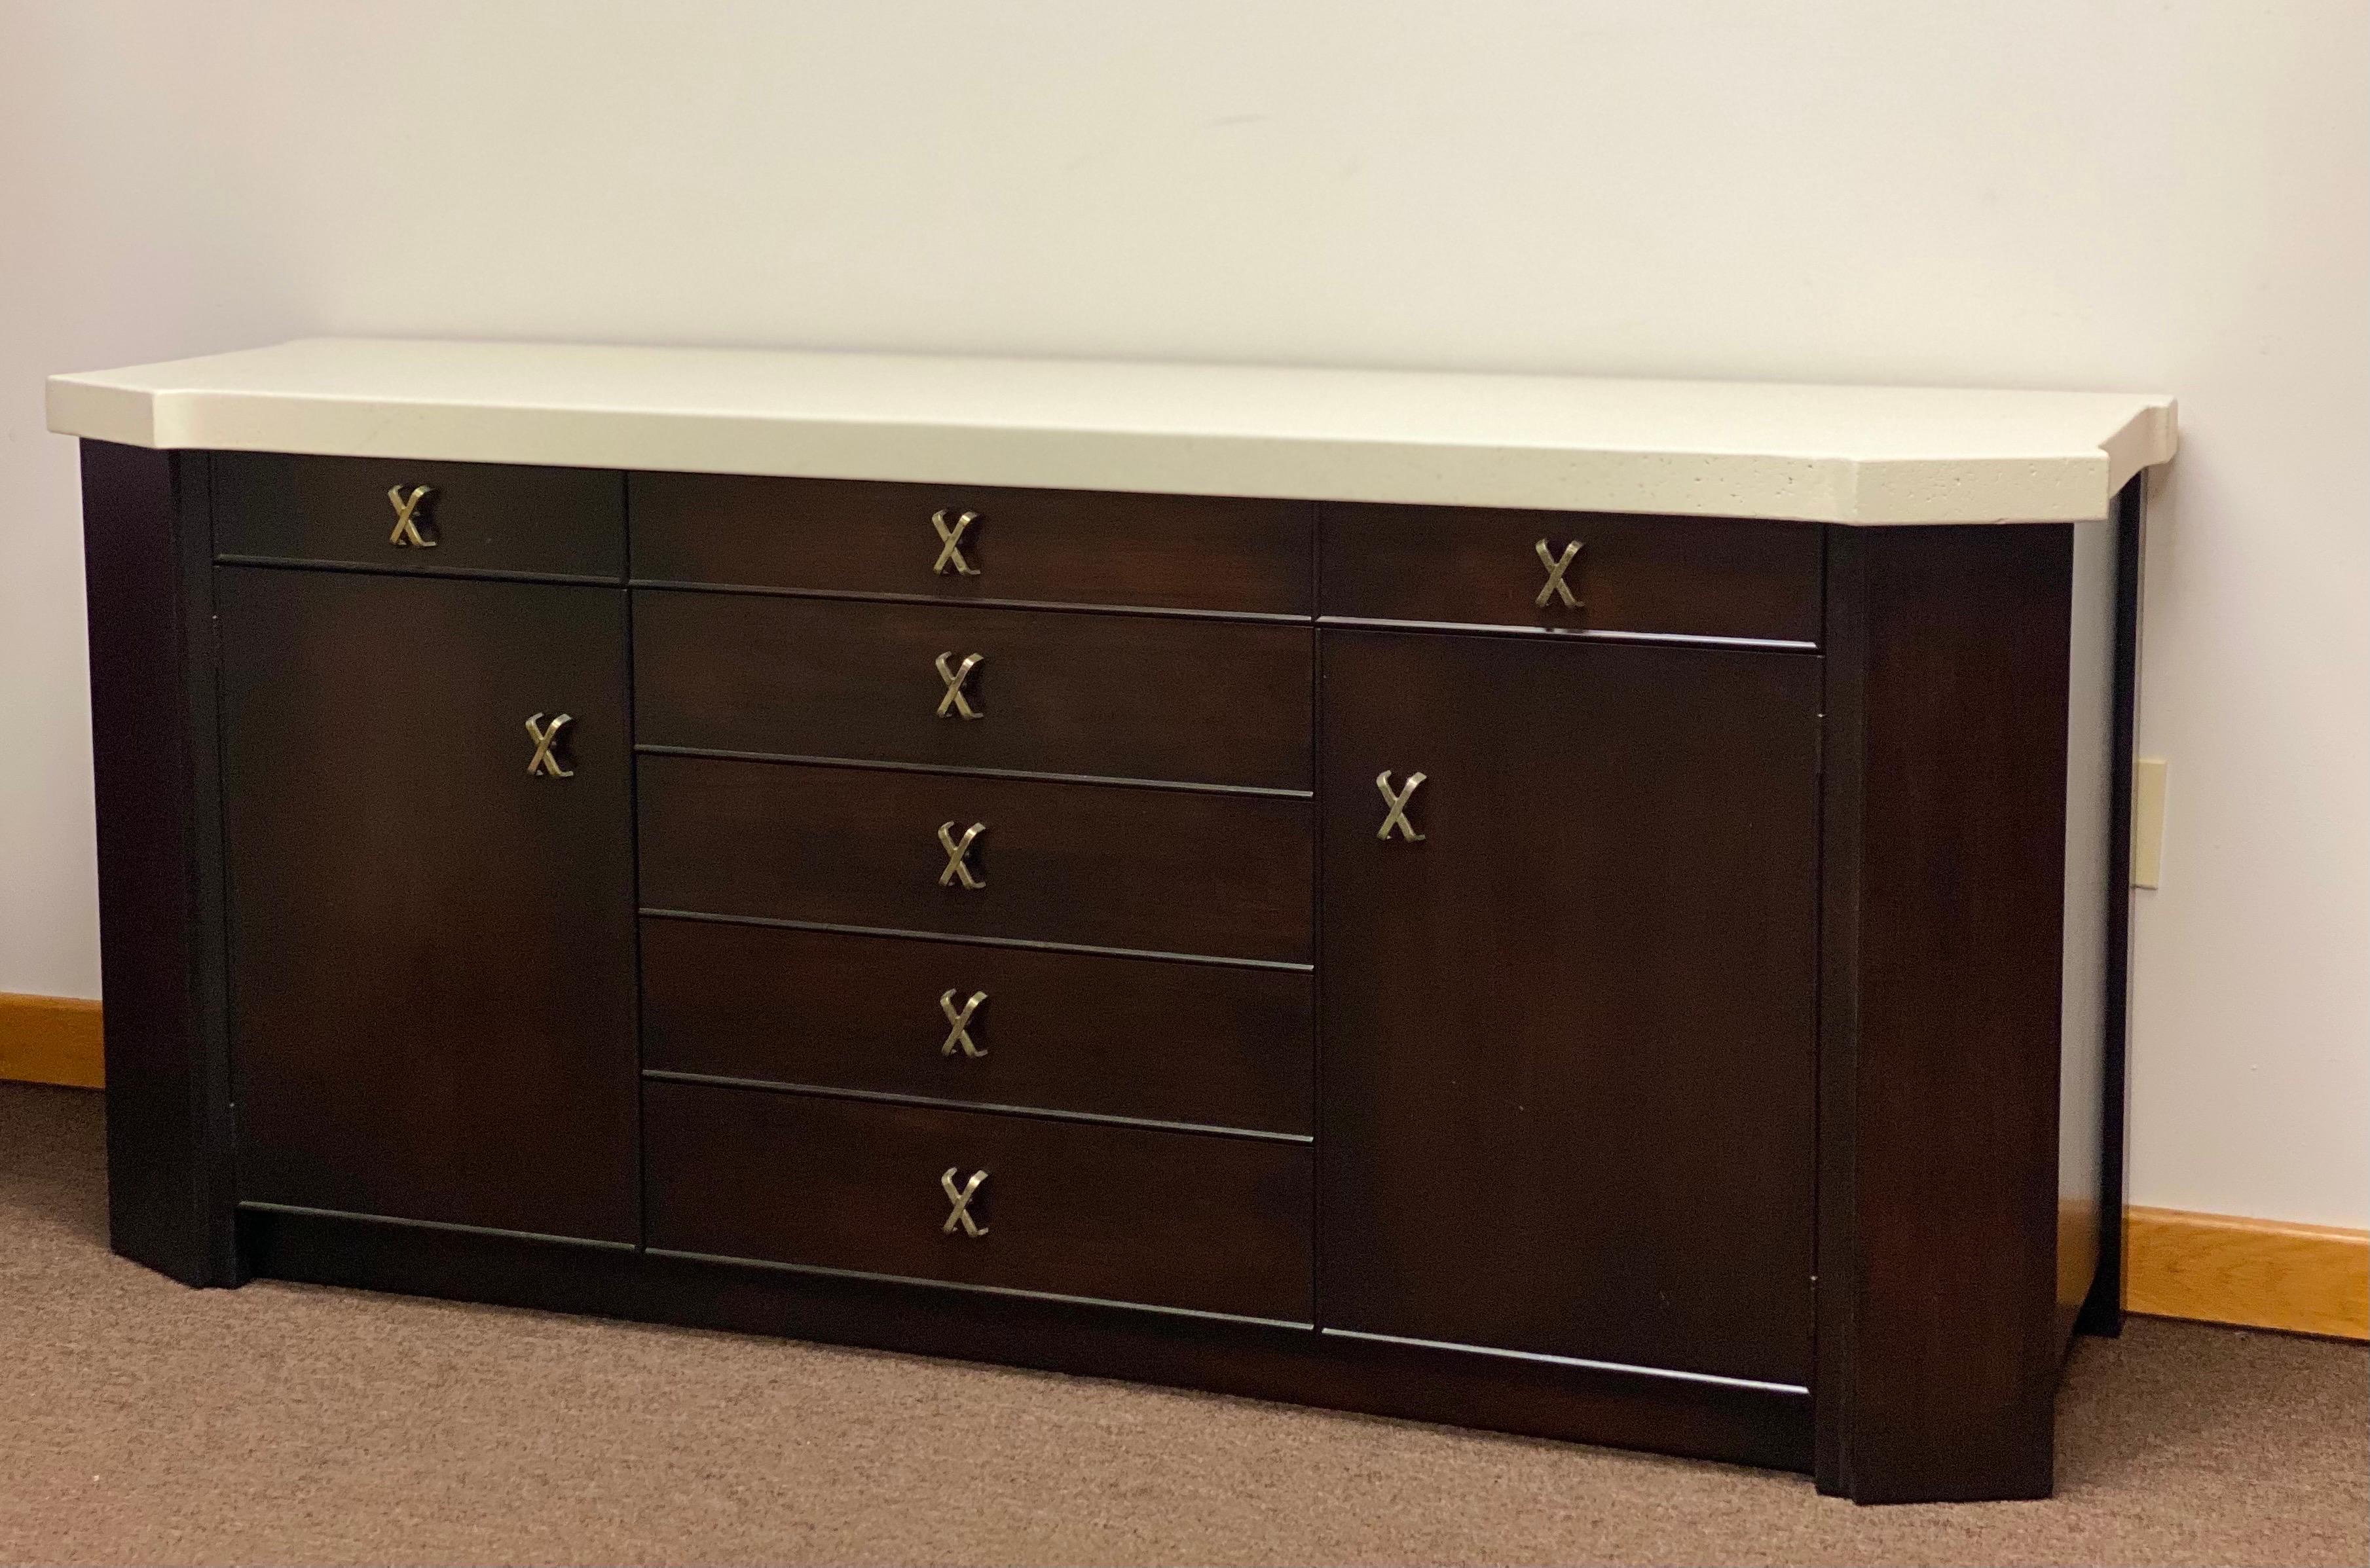 We are very pleased to offer a timeless credenza designed by Paul Frankl for The Johnson Furniture Company, circa the 1950s. Back in the day, Johnson company in Grand Rapids, Michigan was one of the largest furniture companies in the United States.